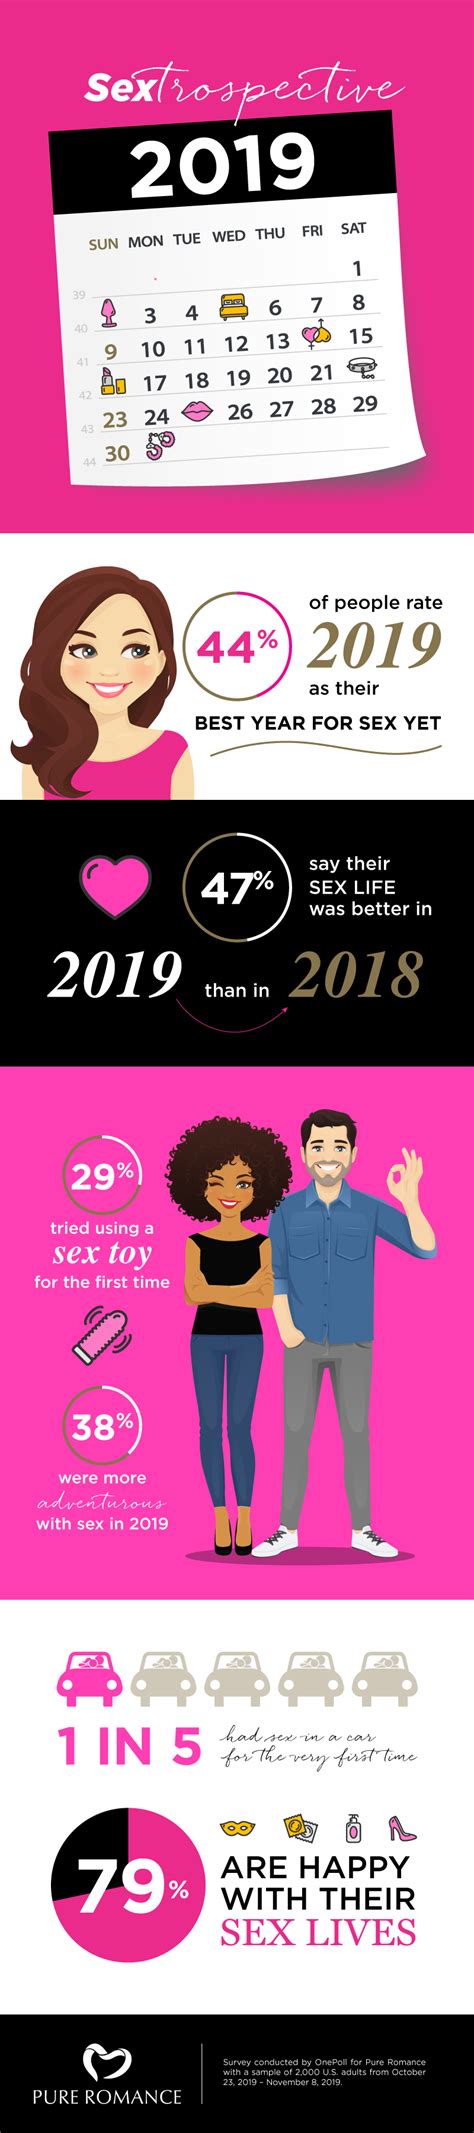 nearly half of americans claim they had the best sex of their life in 2019